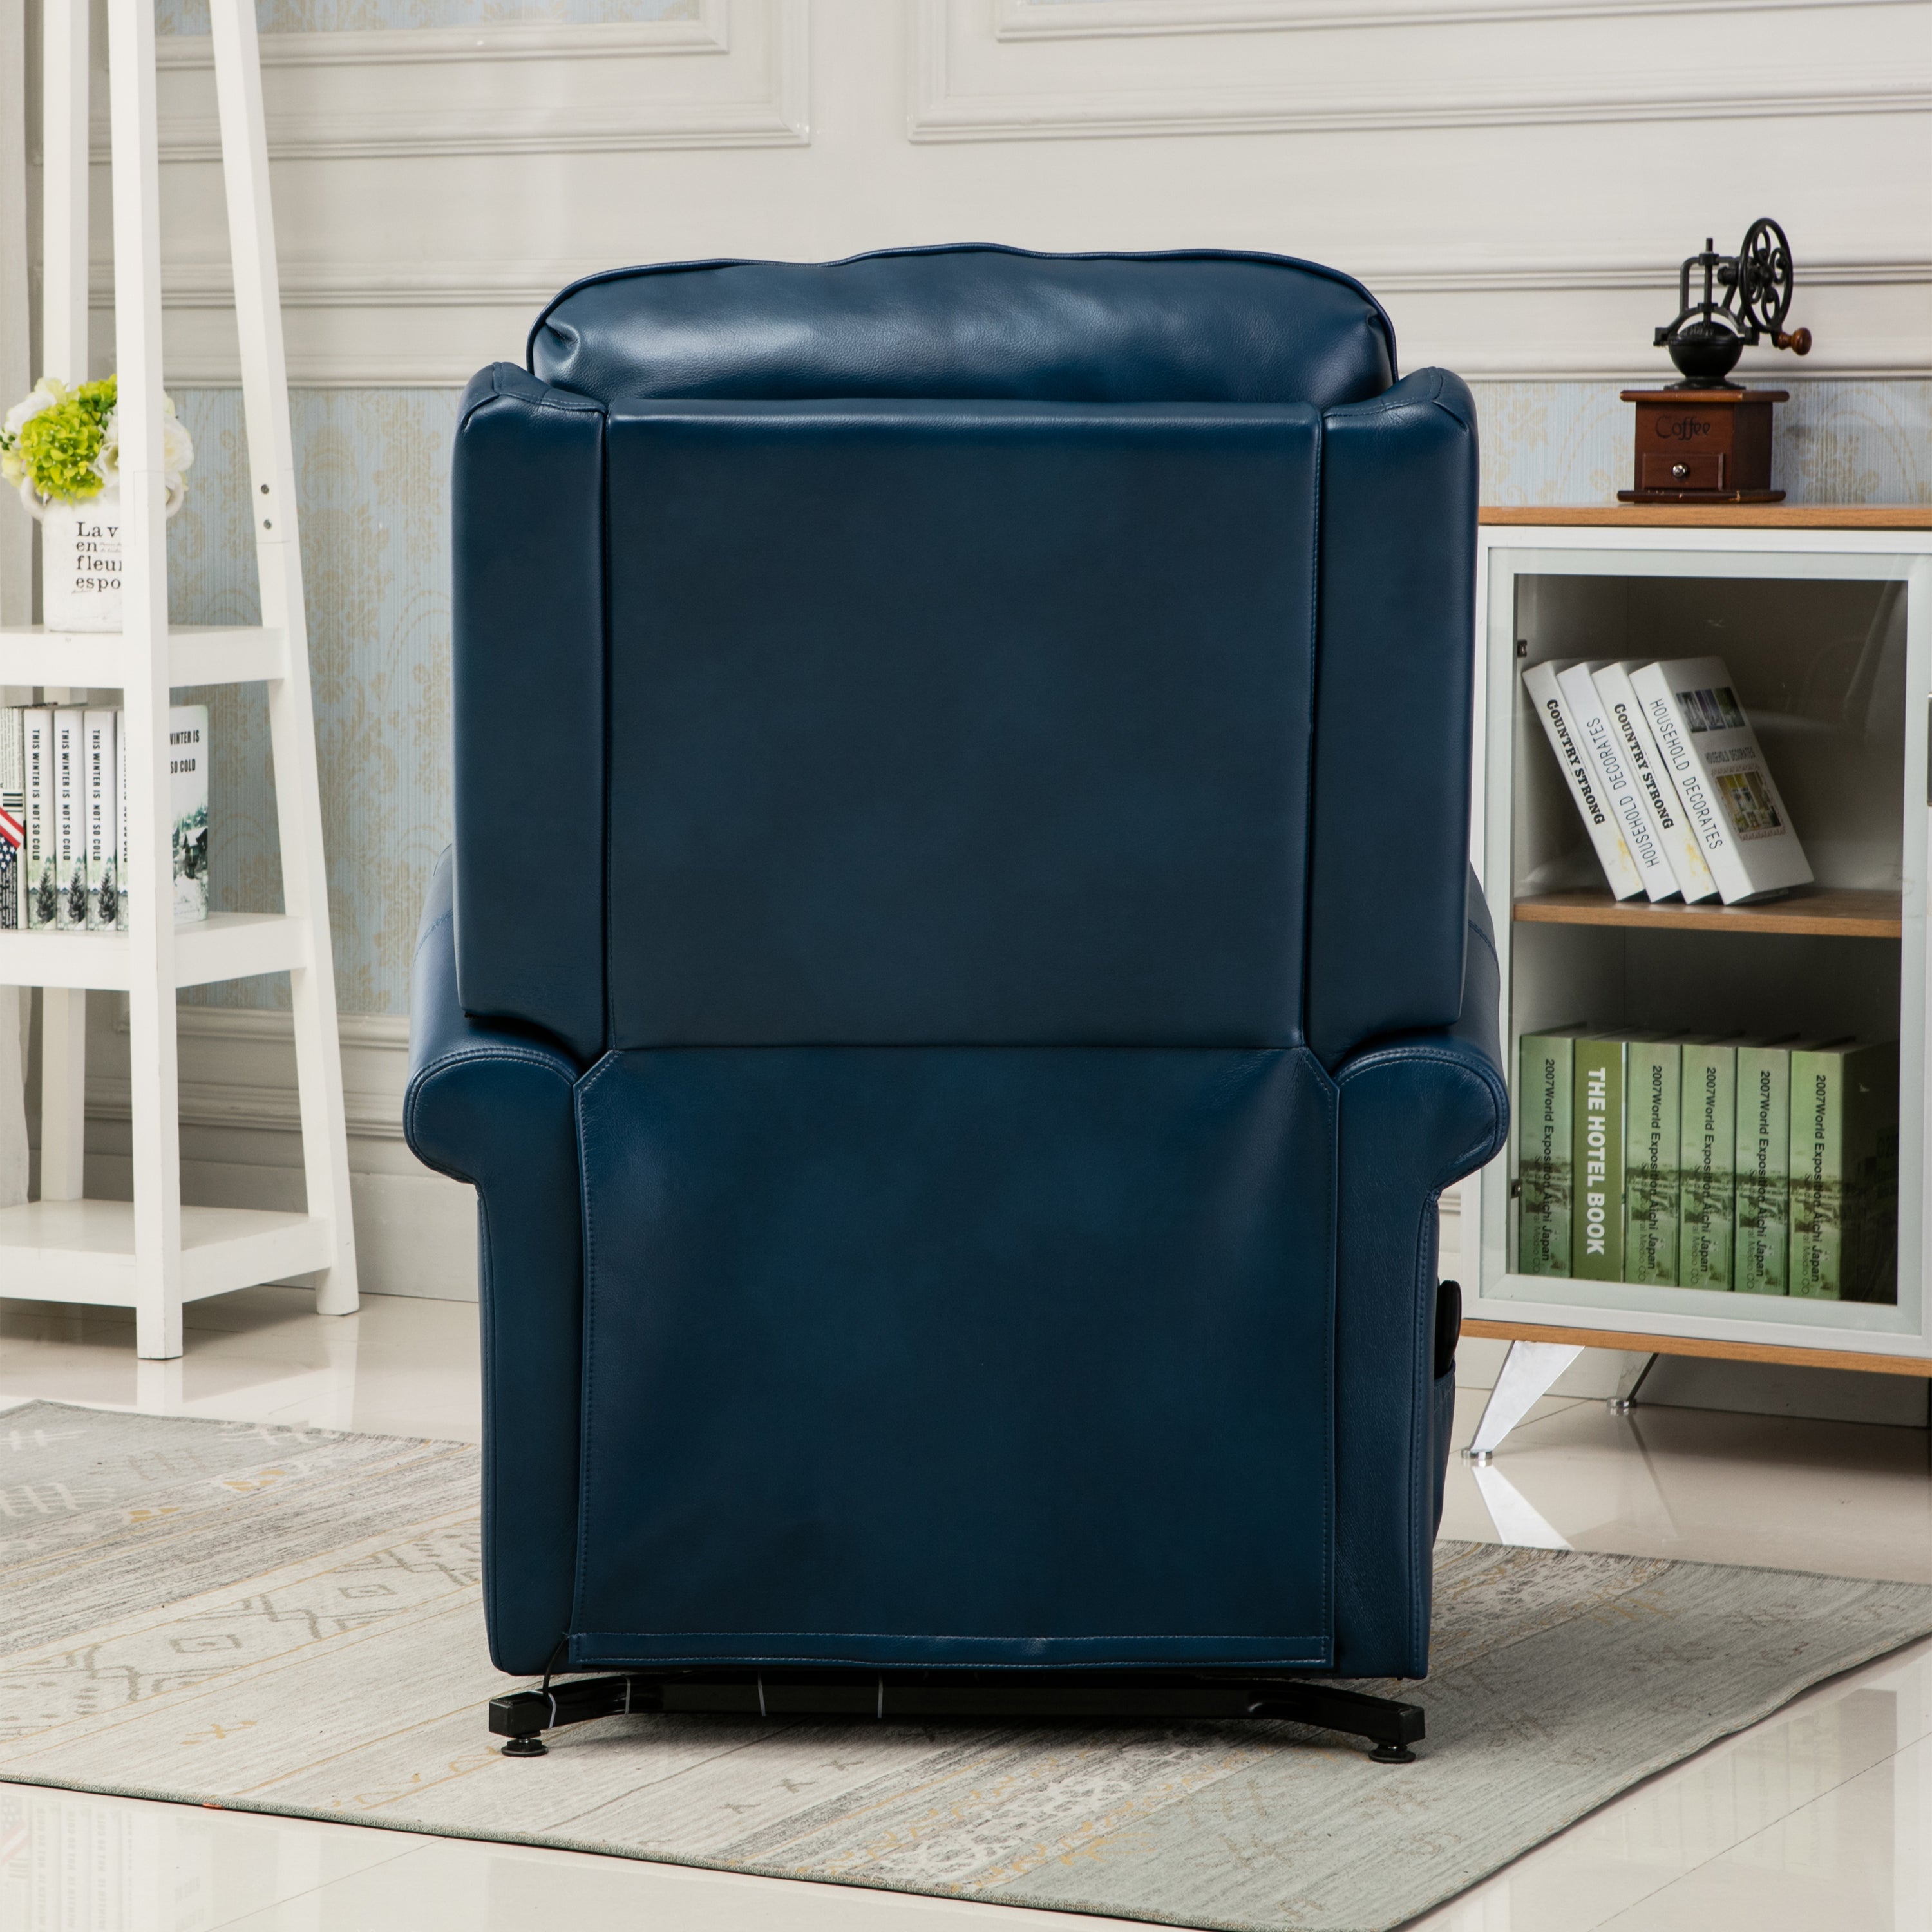 Landis Chair Navy Blue Lift Chair Recliner, back view